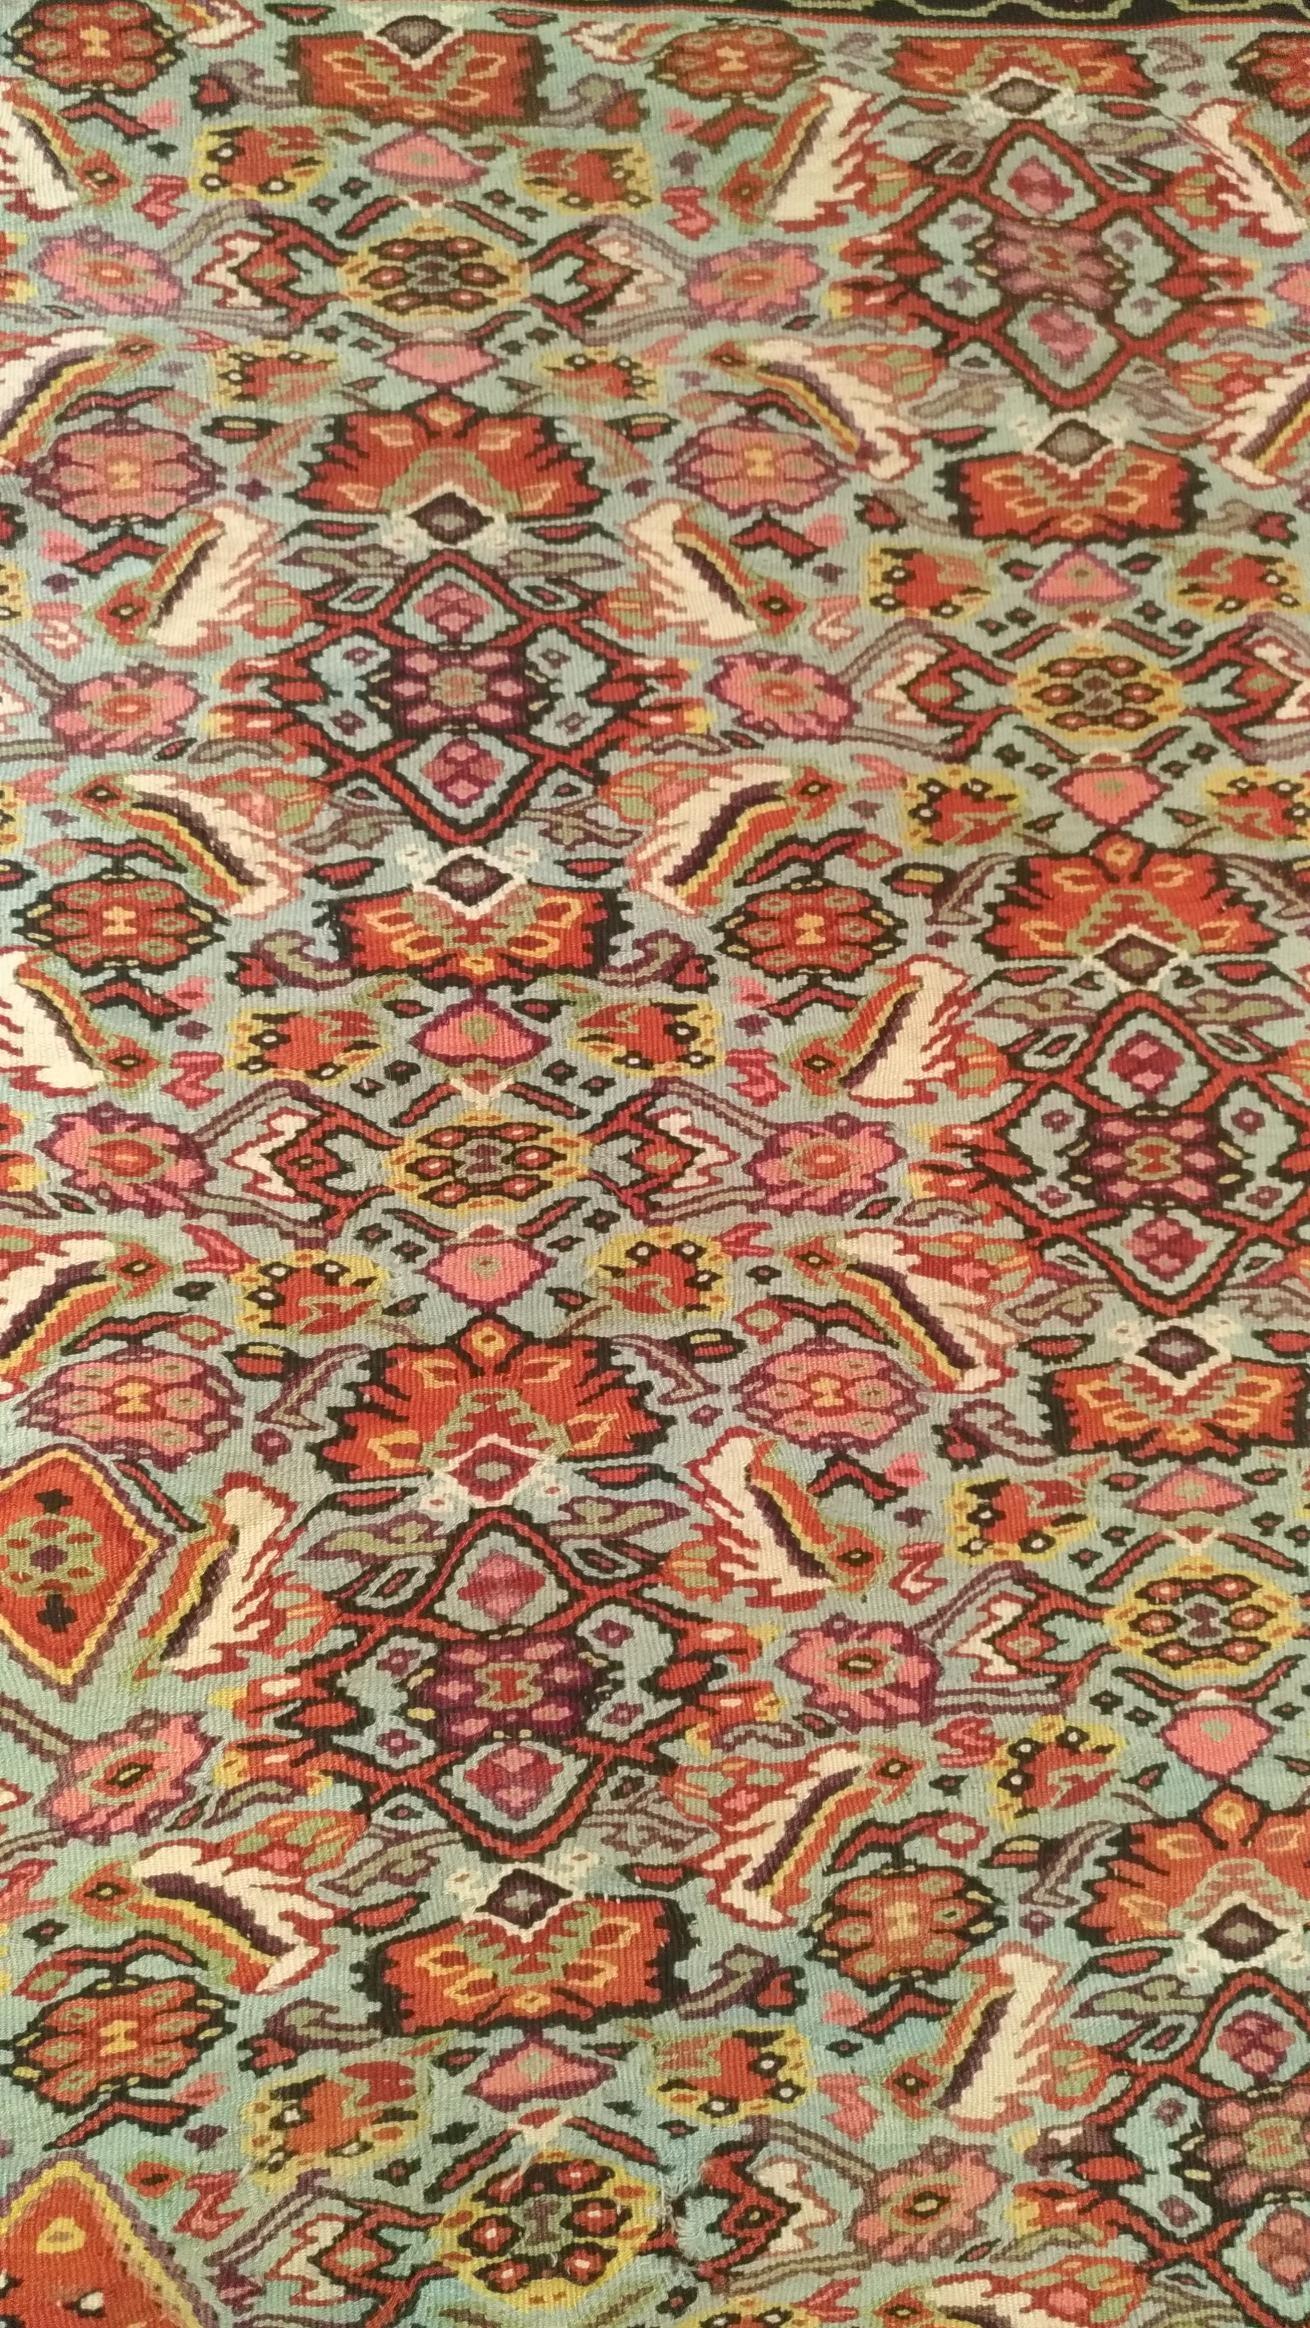 1033 - nice Kilim from the end of the 19th century with beautiful fine central medallion designs, and beautiful colors with pink, orange, yellow, green and dark brown, entirely and finely woven by hand with wool woven on a cotton base.